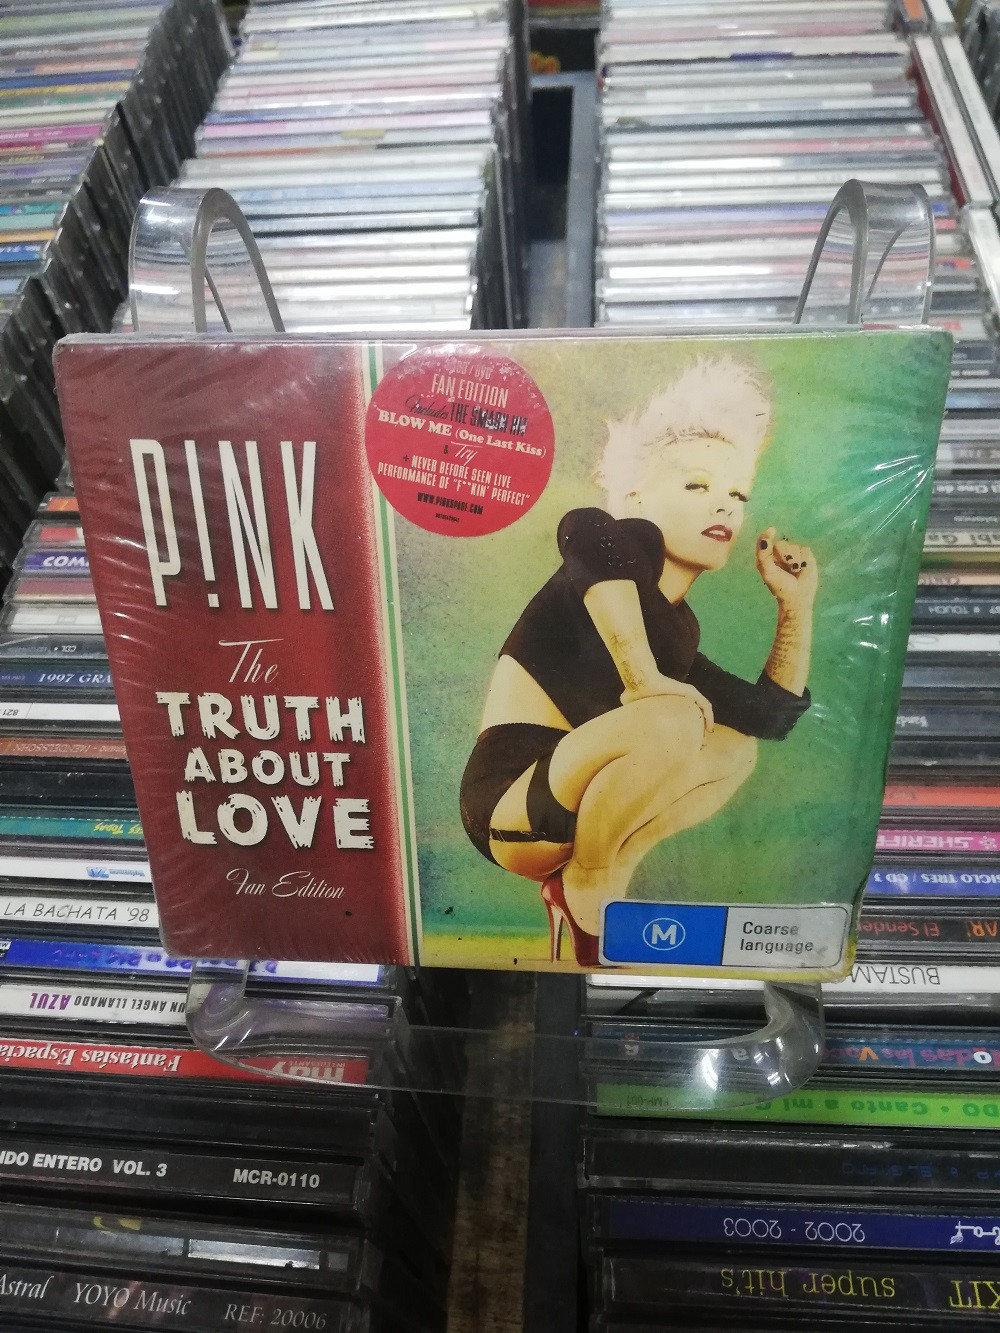 Imagen CD + DVD NUEVO PINK - THE TRUTH ABOUT LOVE  1